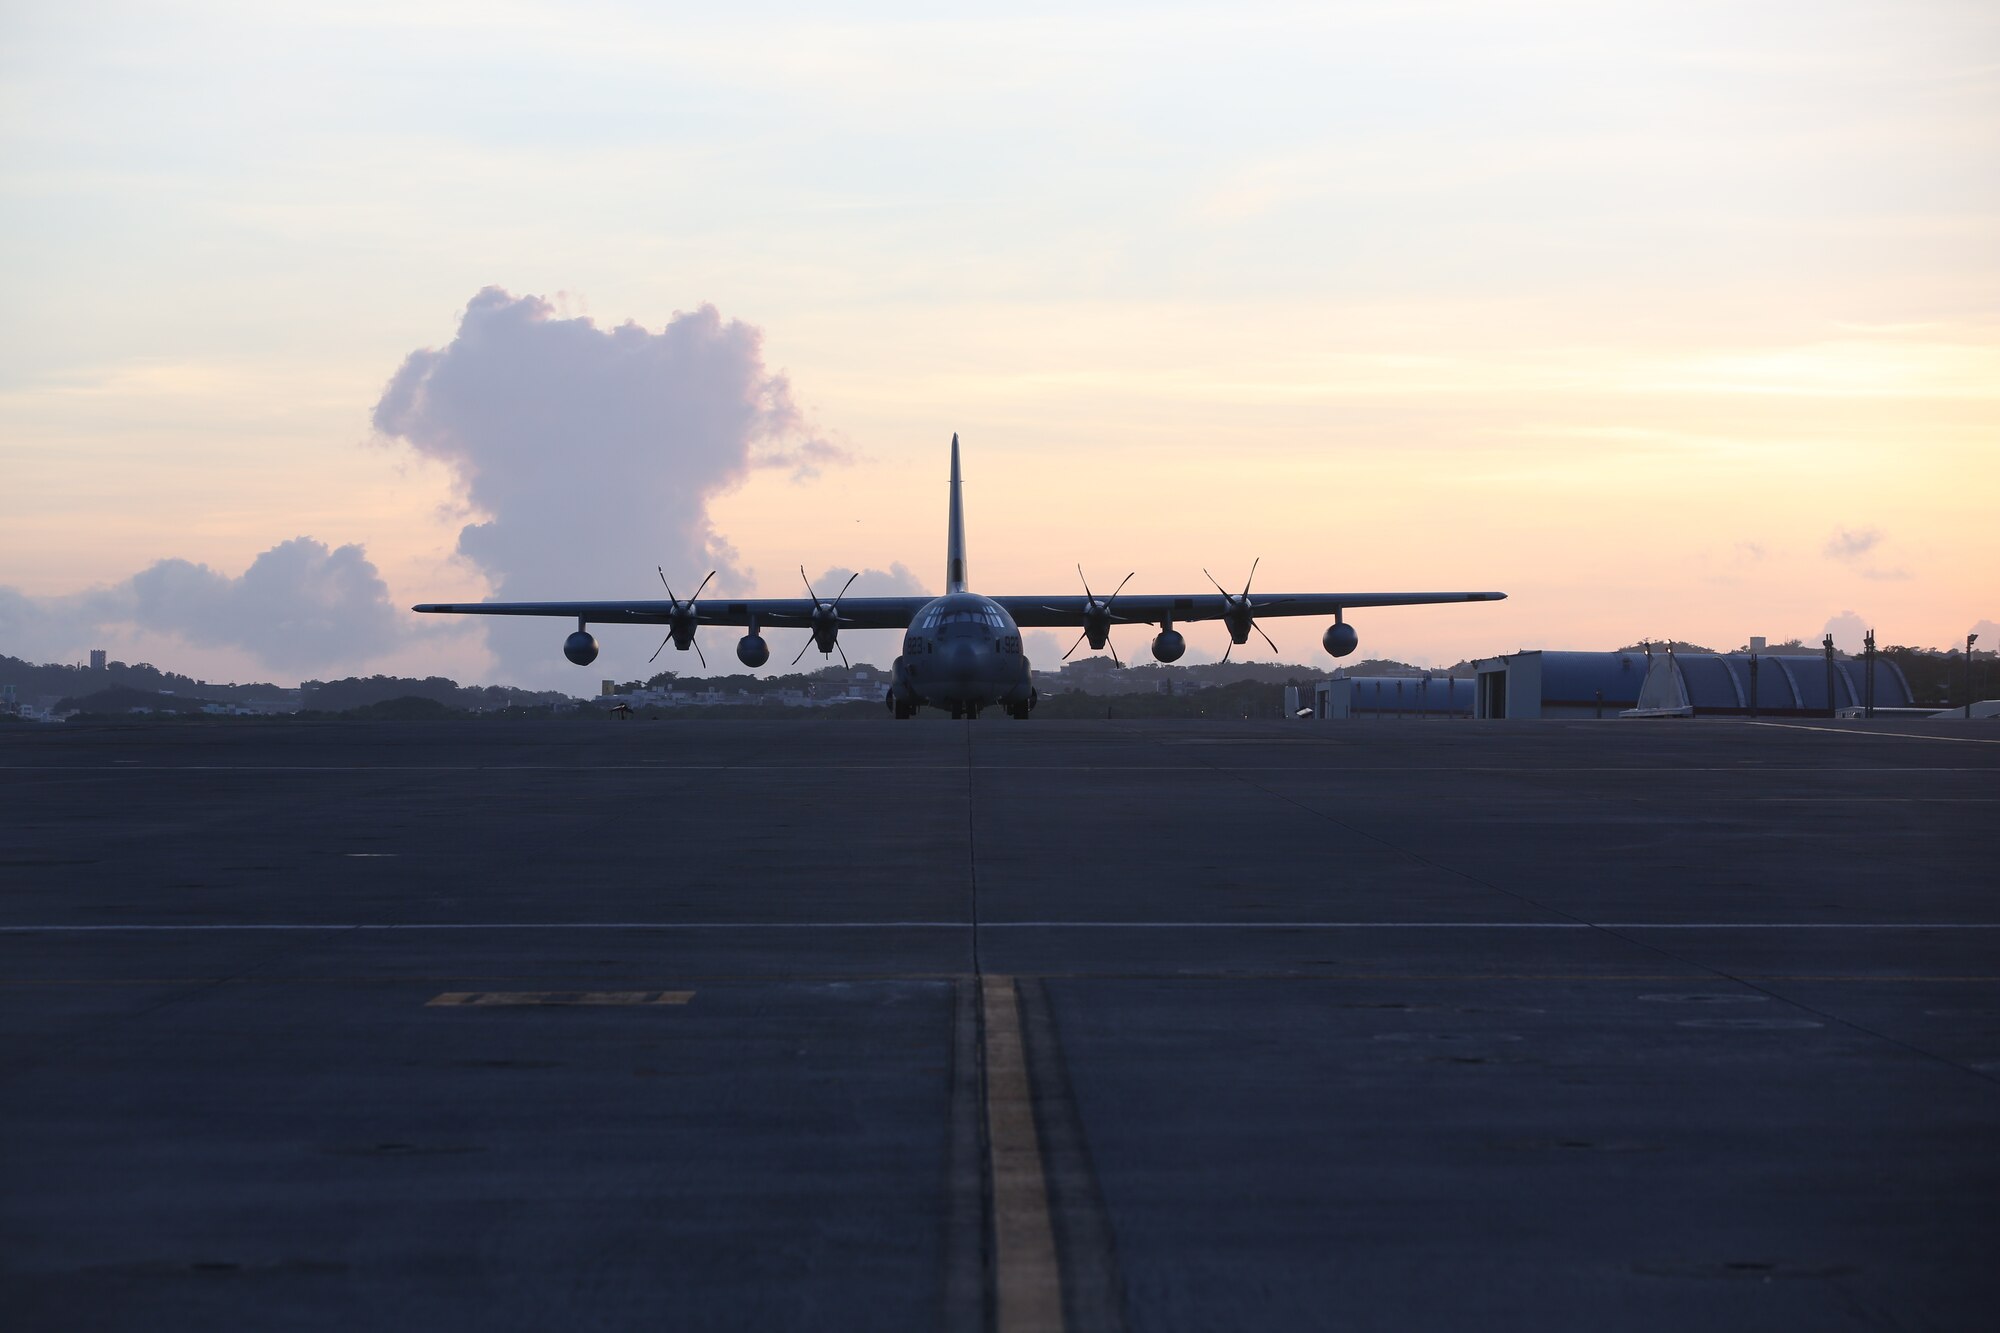 U.S. Marine Corps C-130 waits at Marine Corps Air Station Futenma, August 1, 2016. The C-130 is planned to transport a HIMAR to the Philippines for Phiblex 2016. (U.S. Marine Corps photo by Lance Cpl. Brooke Deiters/ Released)